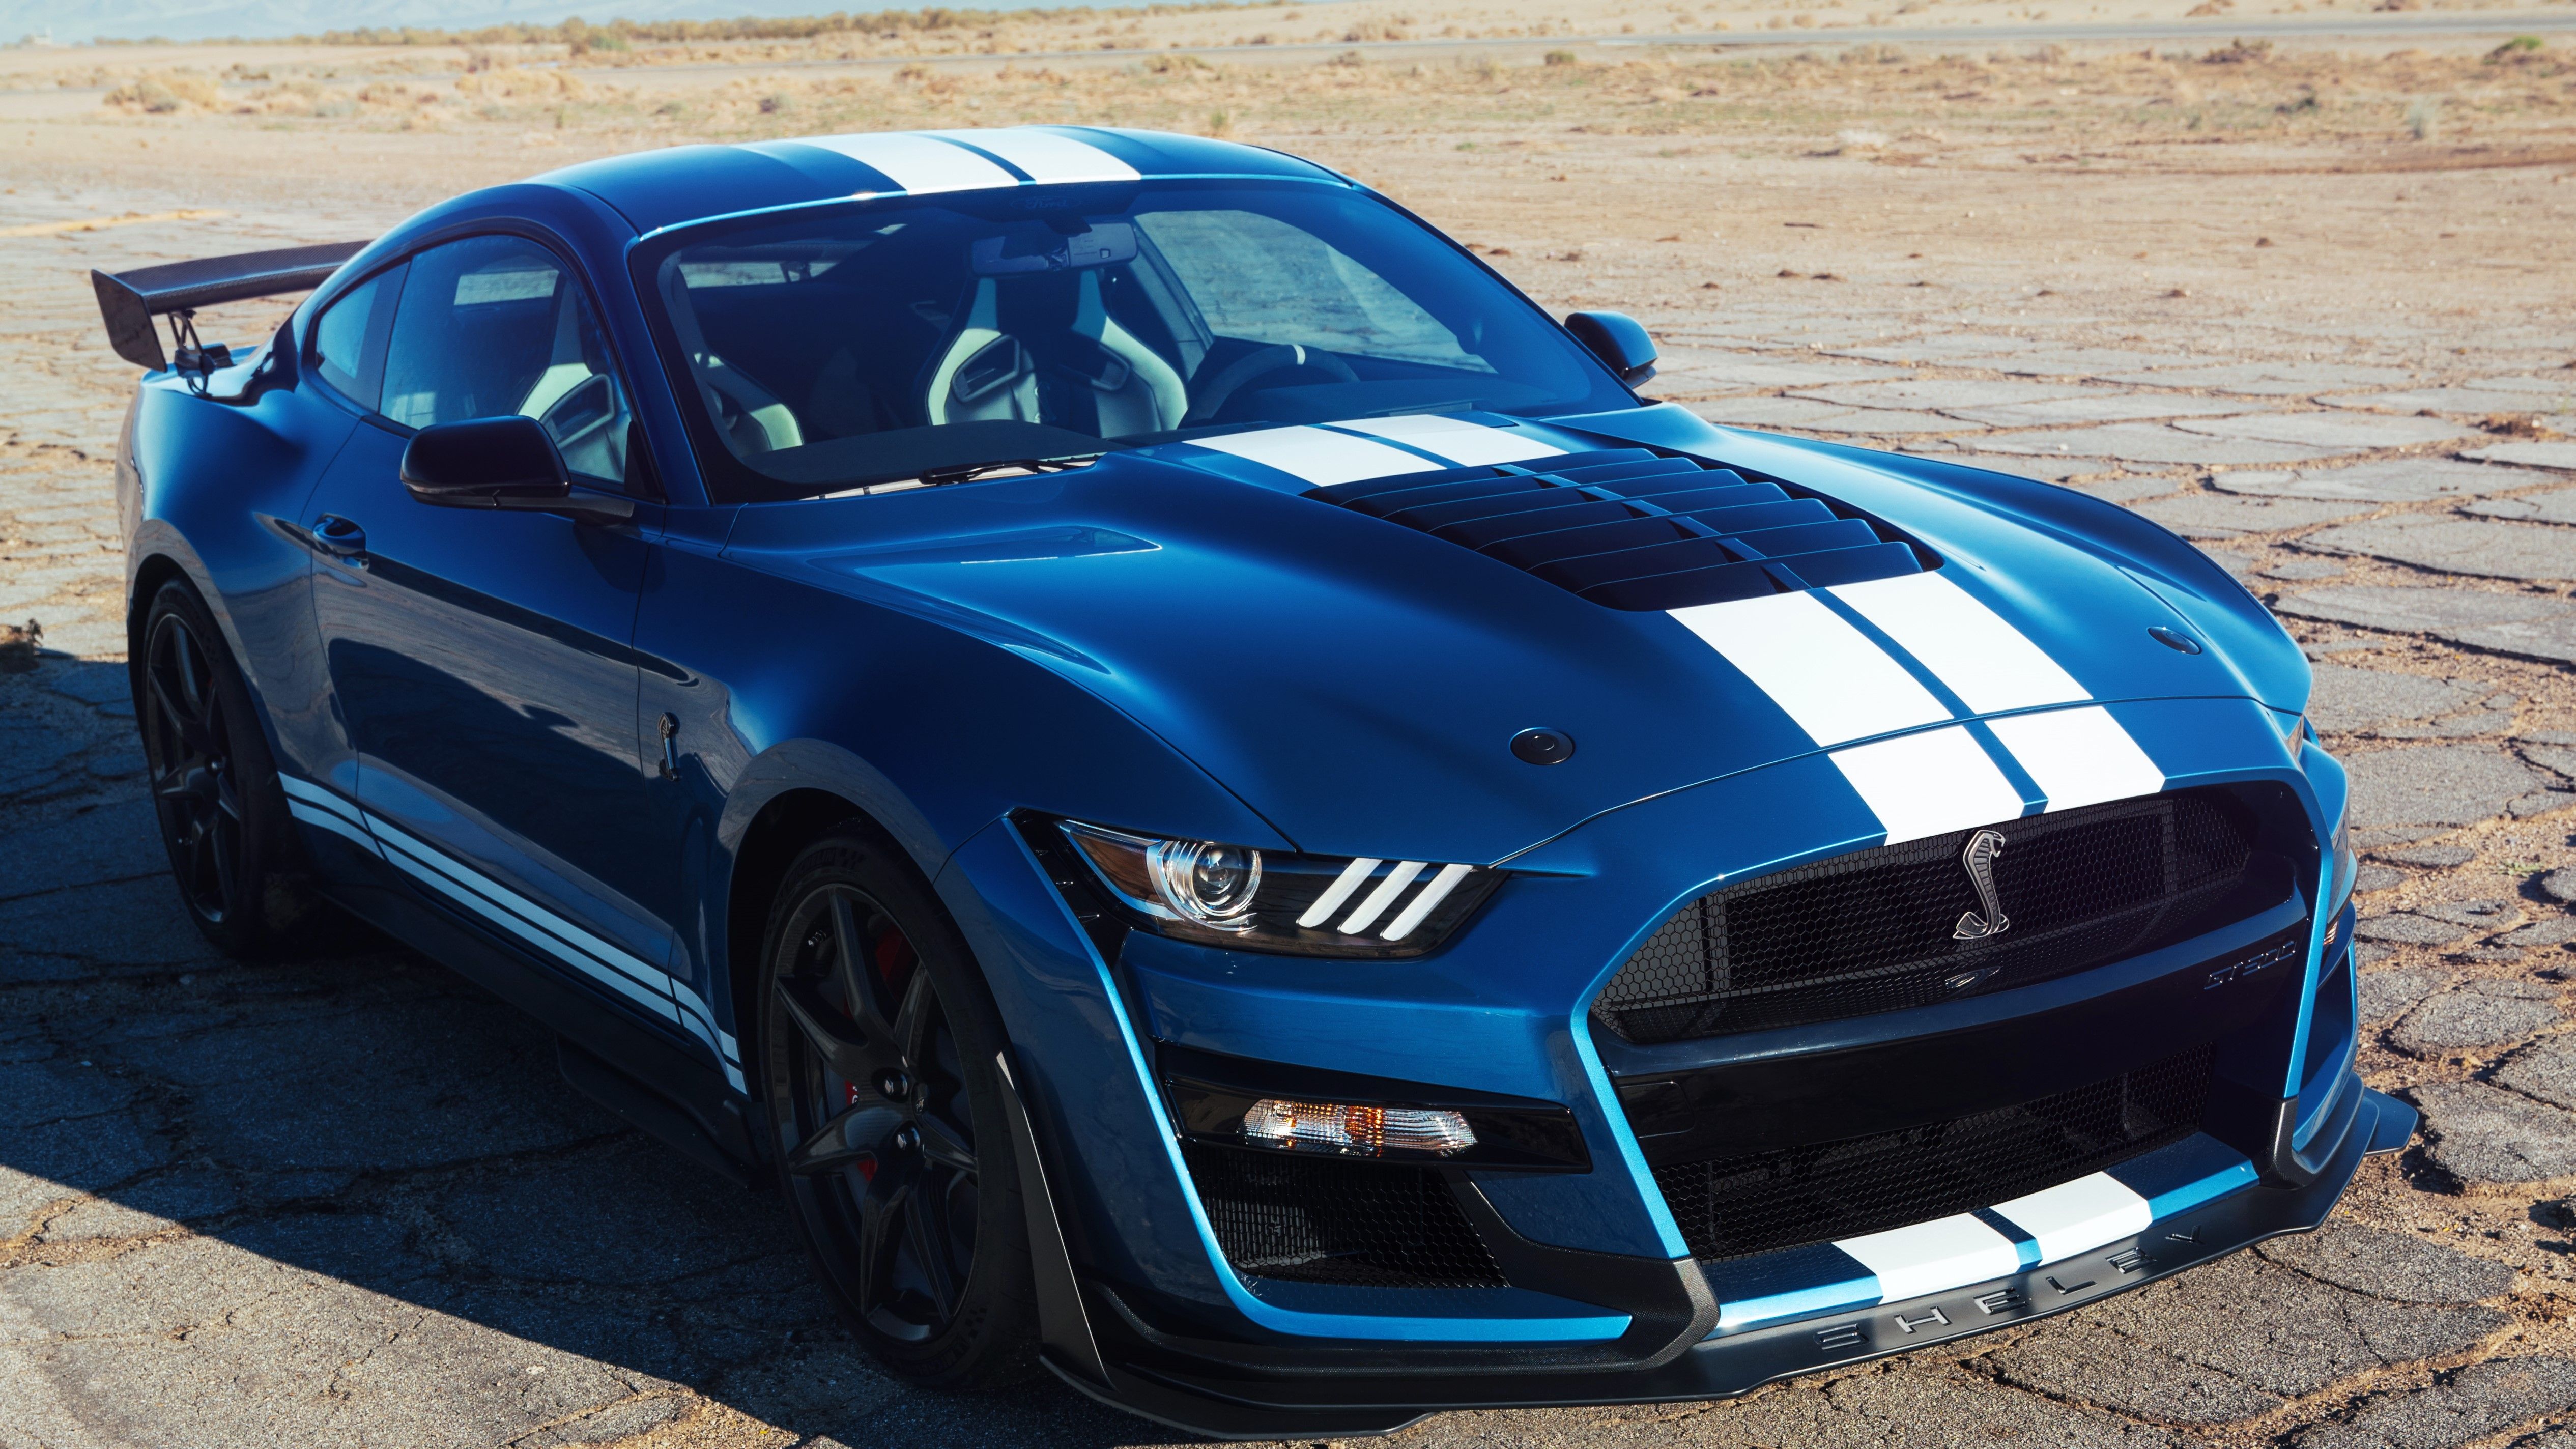 2020 Ford Mustang Shelby GT500: The beast of the muscle car world.